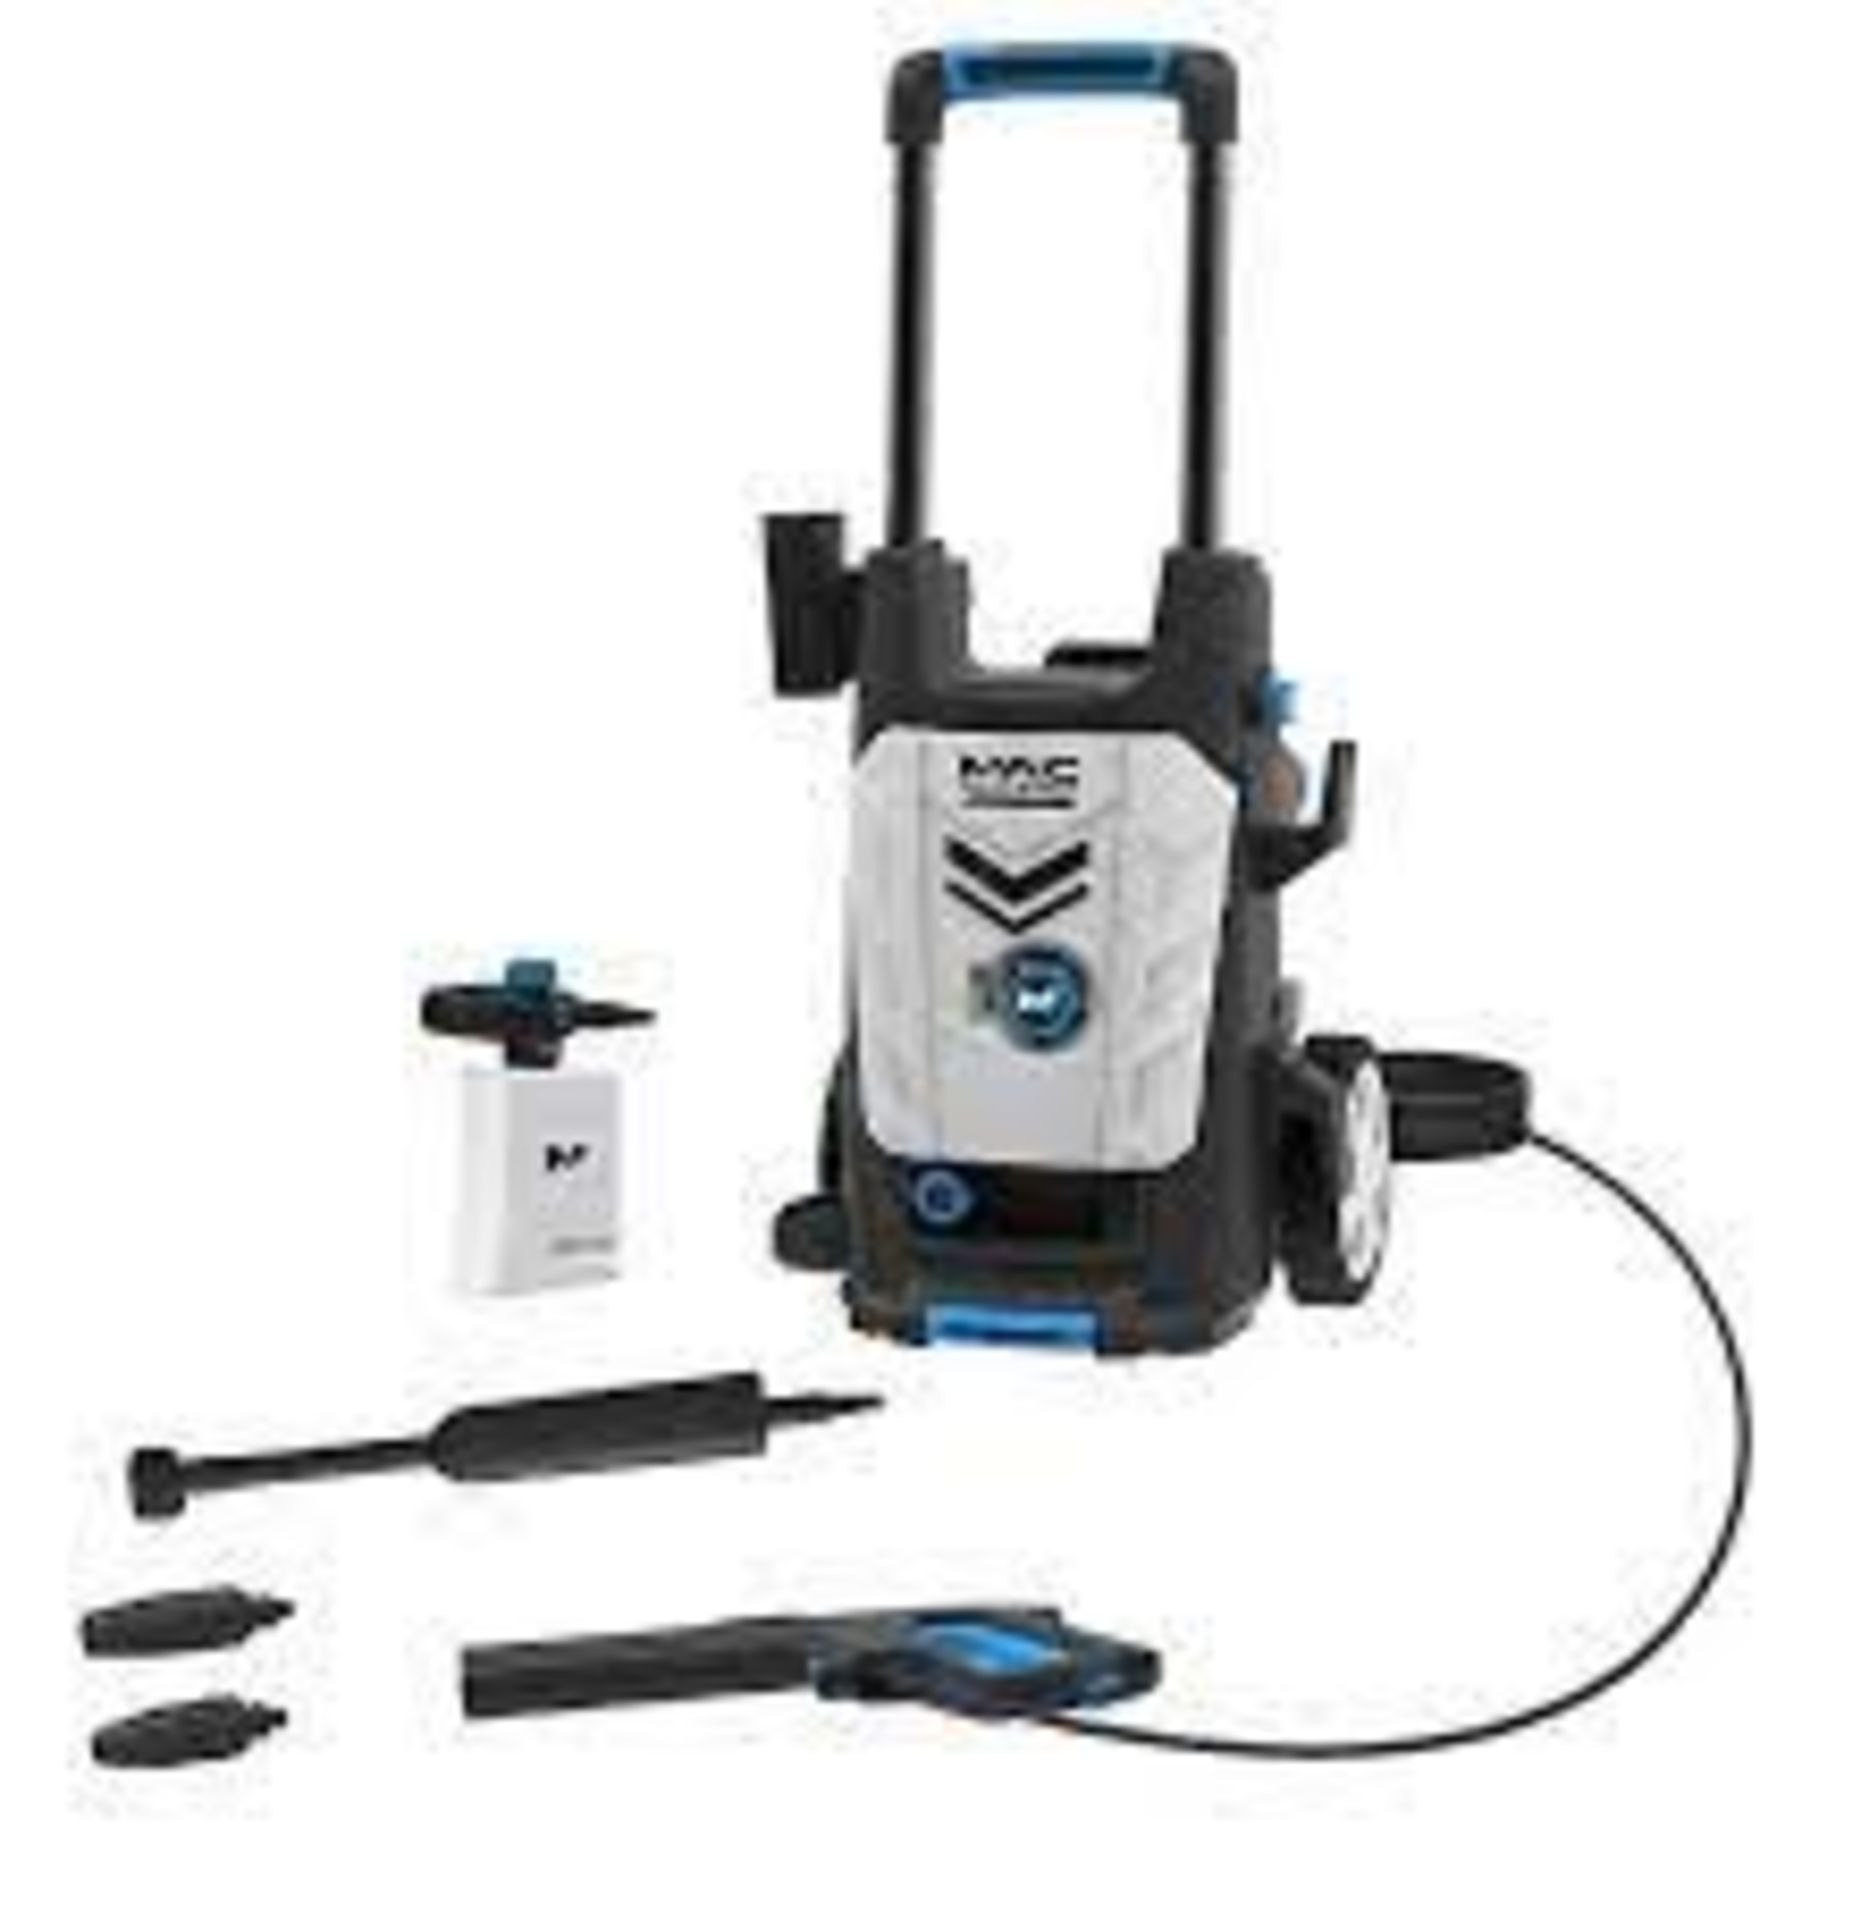 Mac Allister Corded Pressure washer 1.8kW MPWP1800-3. - R14.13. This 1800w compact pressure washer